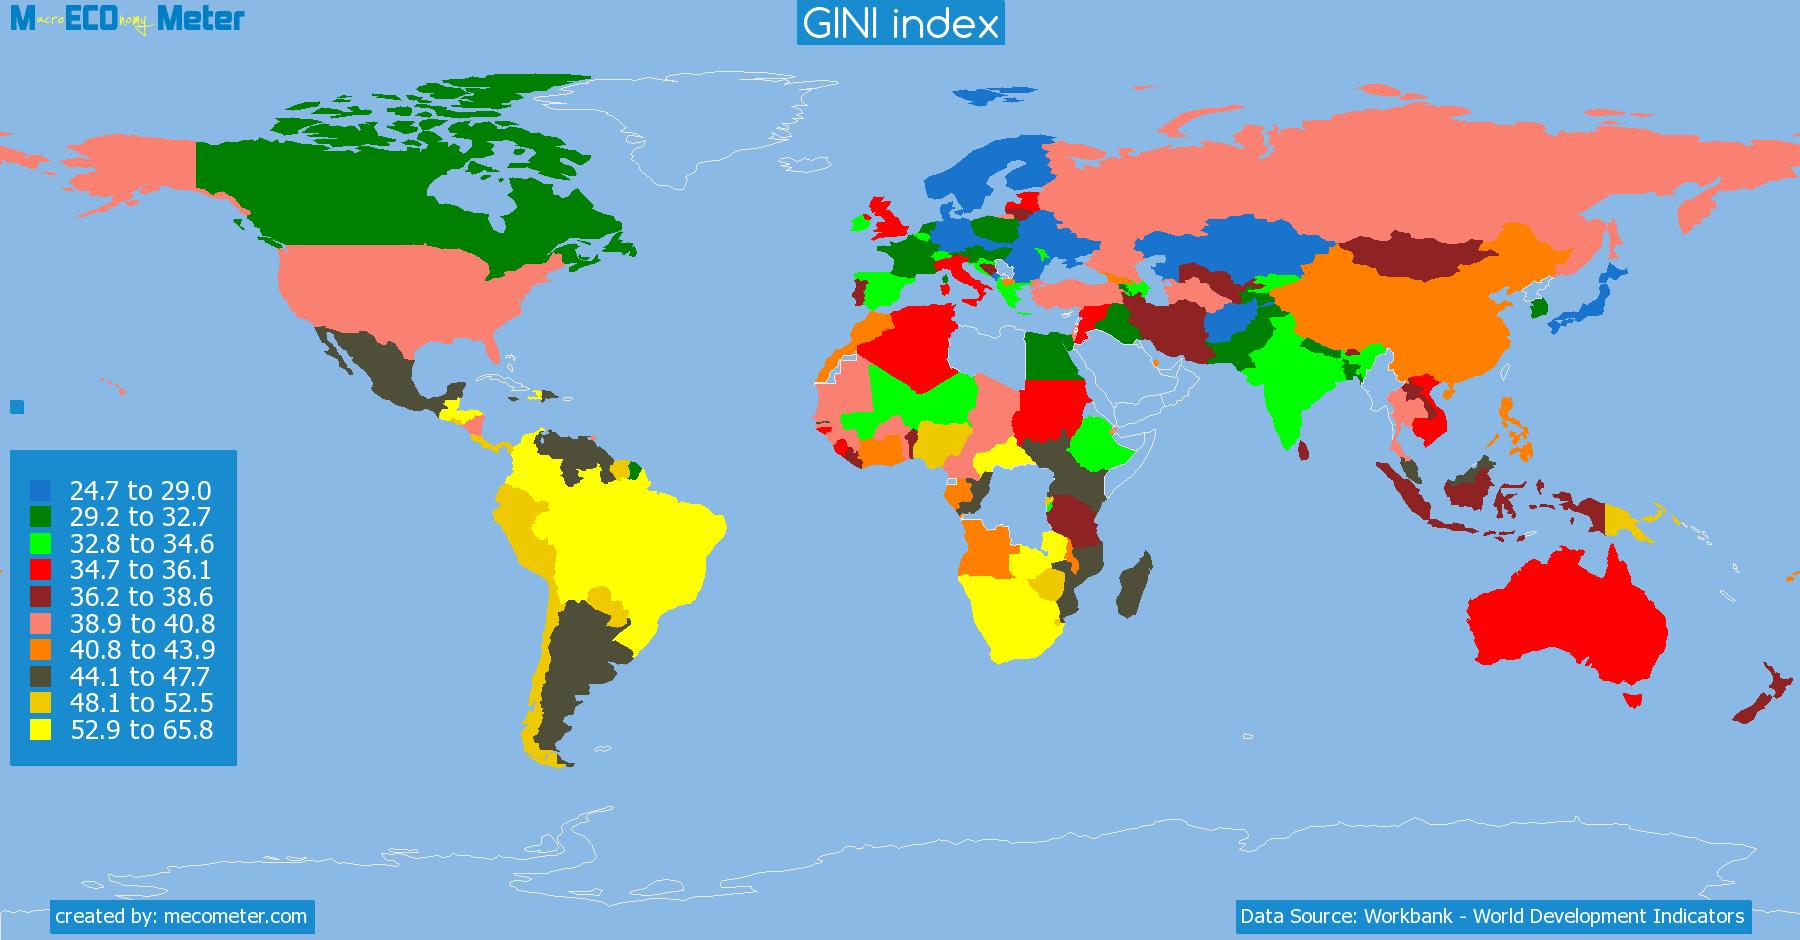 list of countries by GINI index